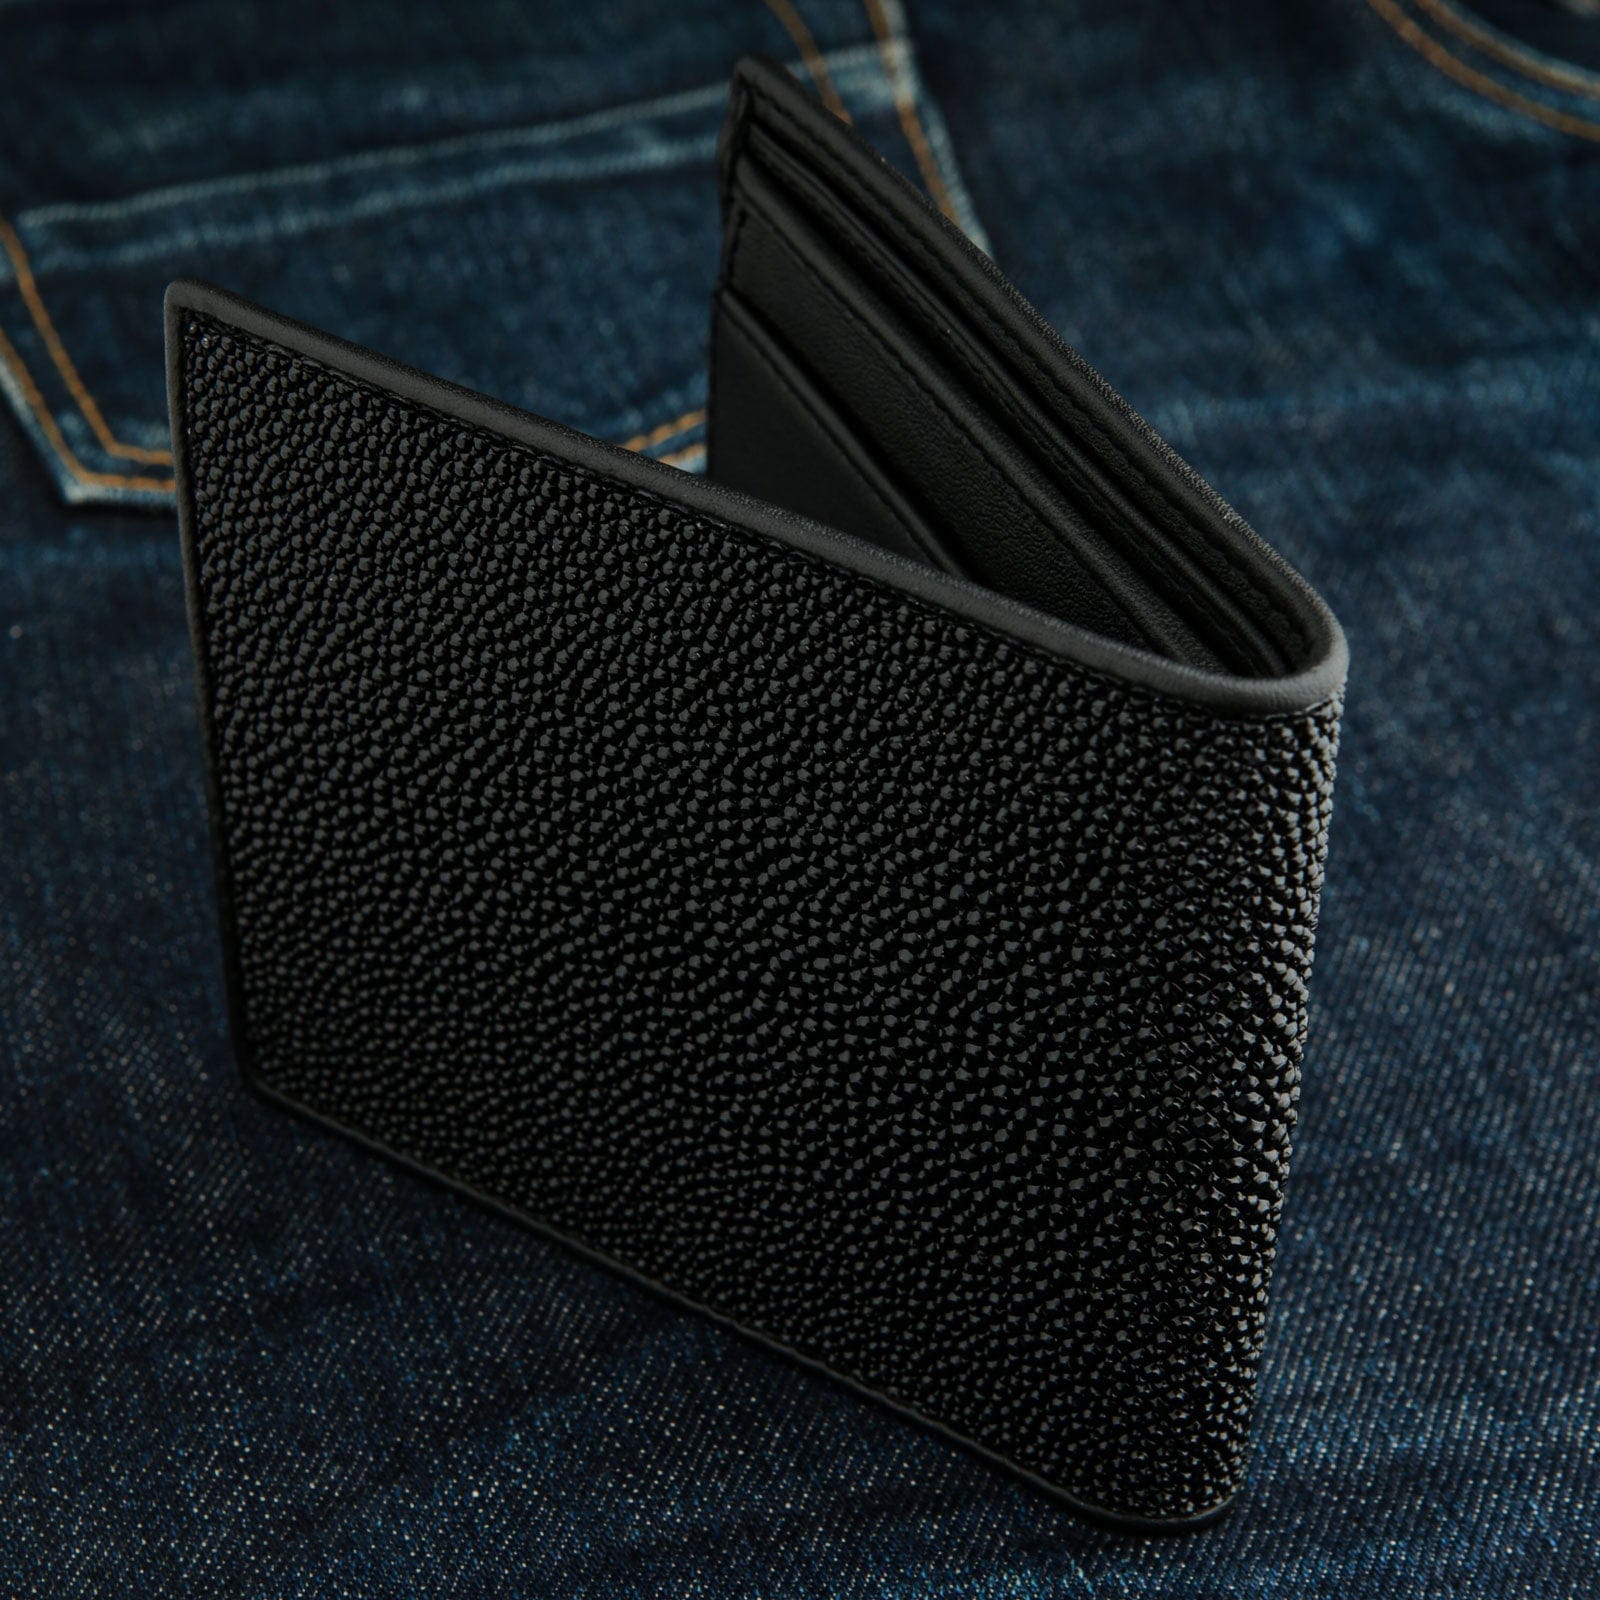 Pince Wallet Taiga - Wallets and Small Leather Goods